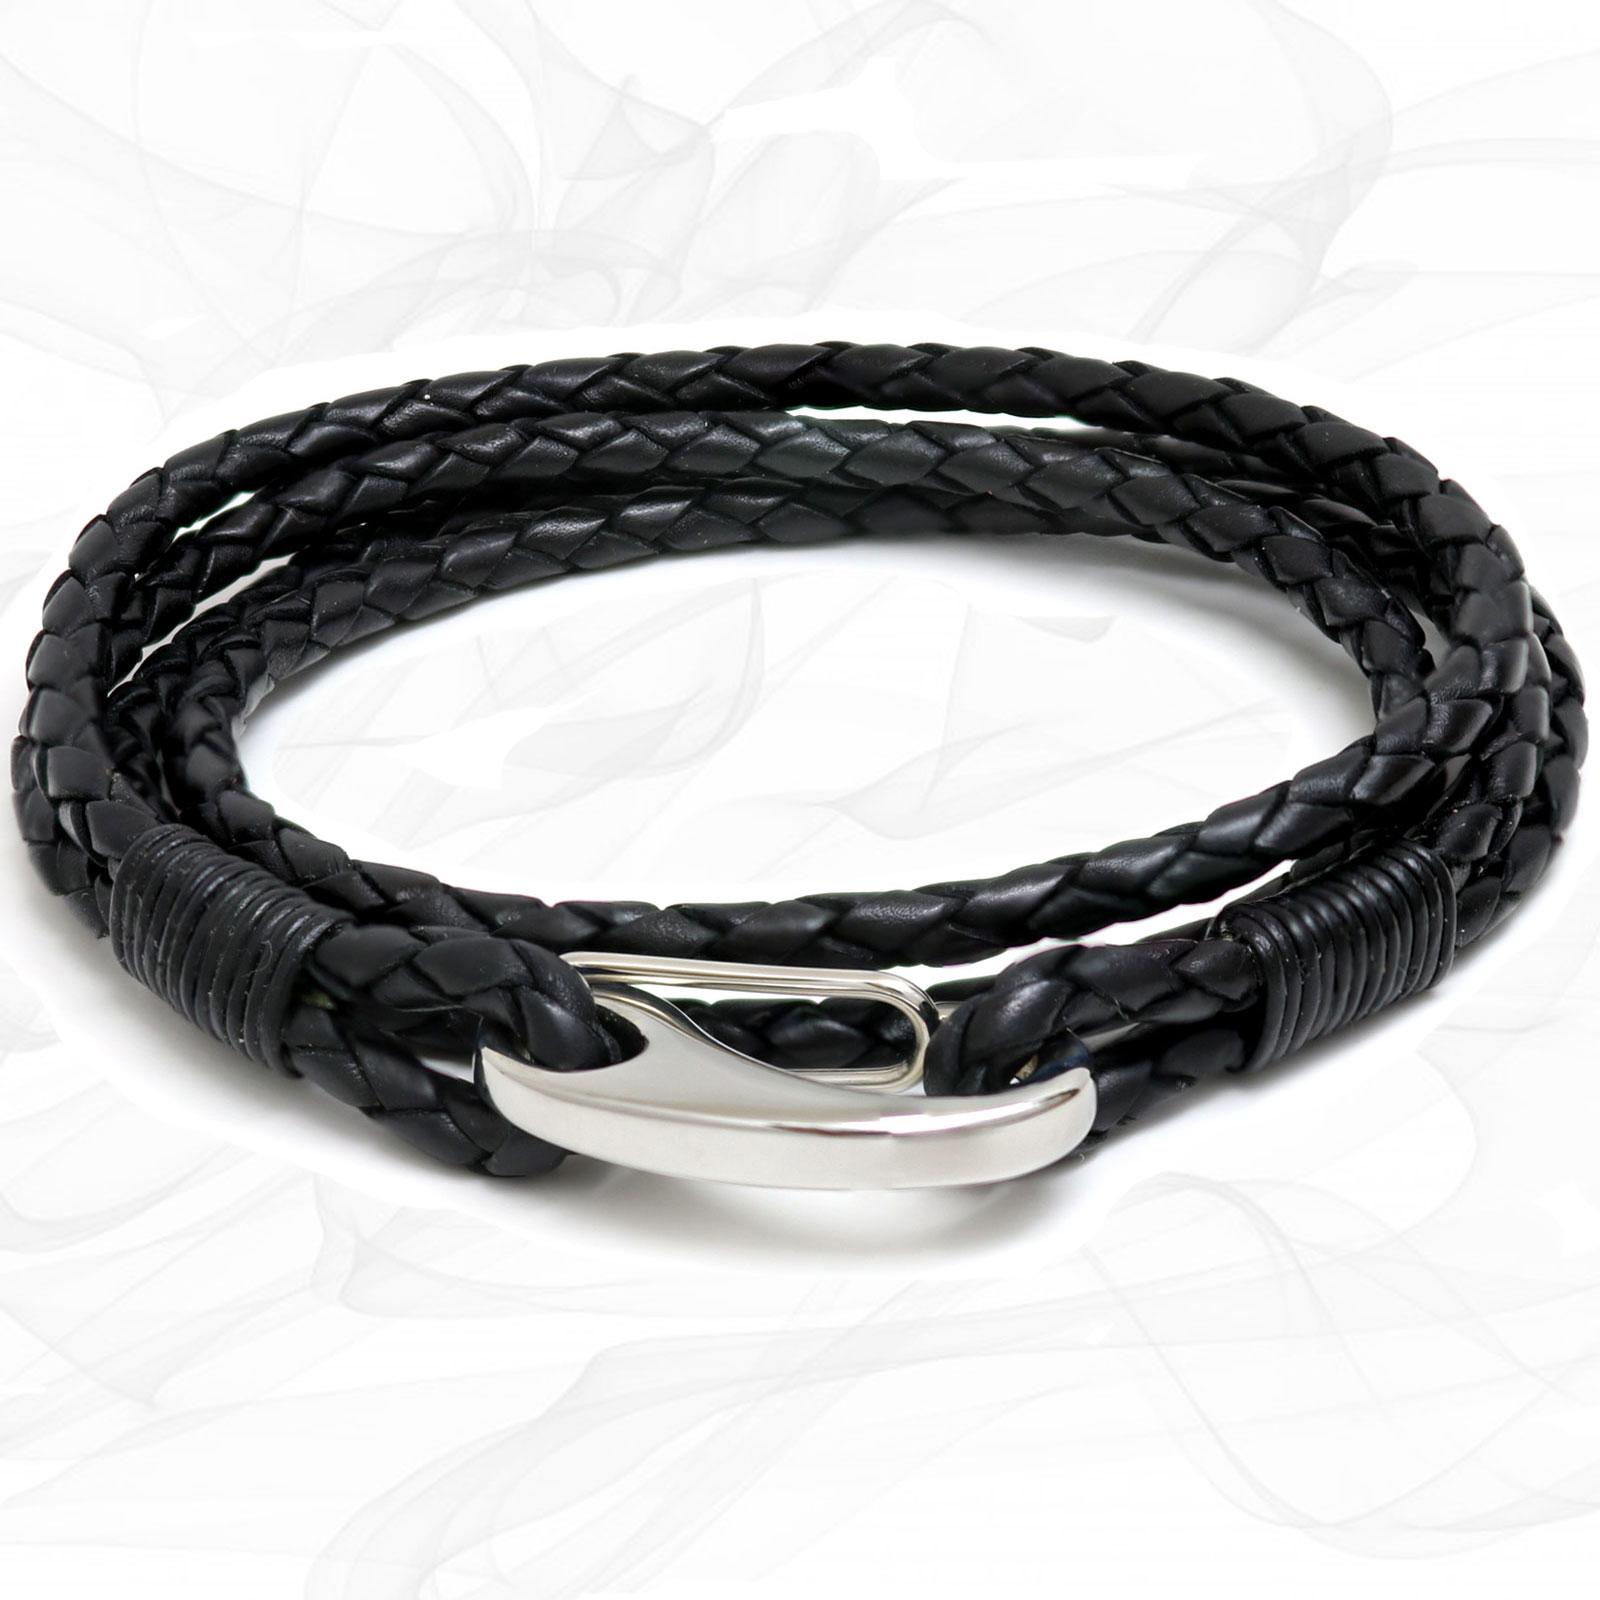 Black Quad Wrap Bolo Leather Bracelet with Steel Lobster Clasp by Tribal Steel